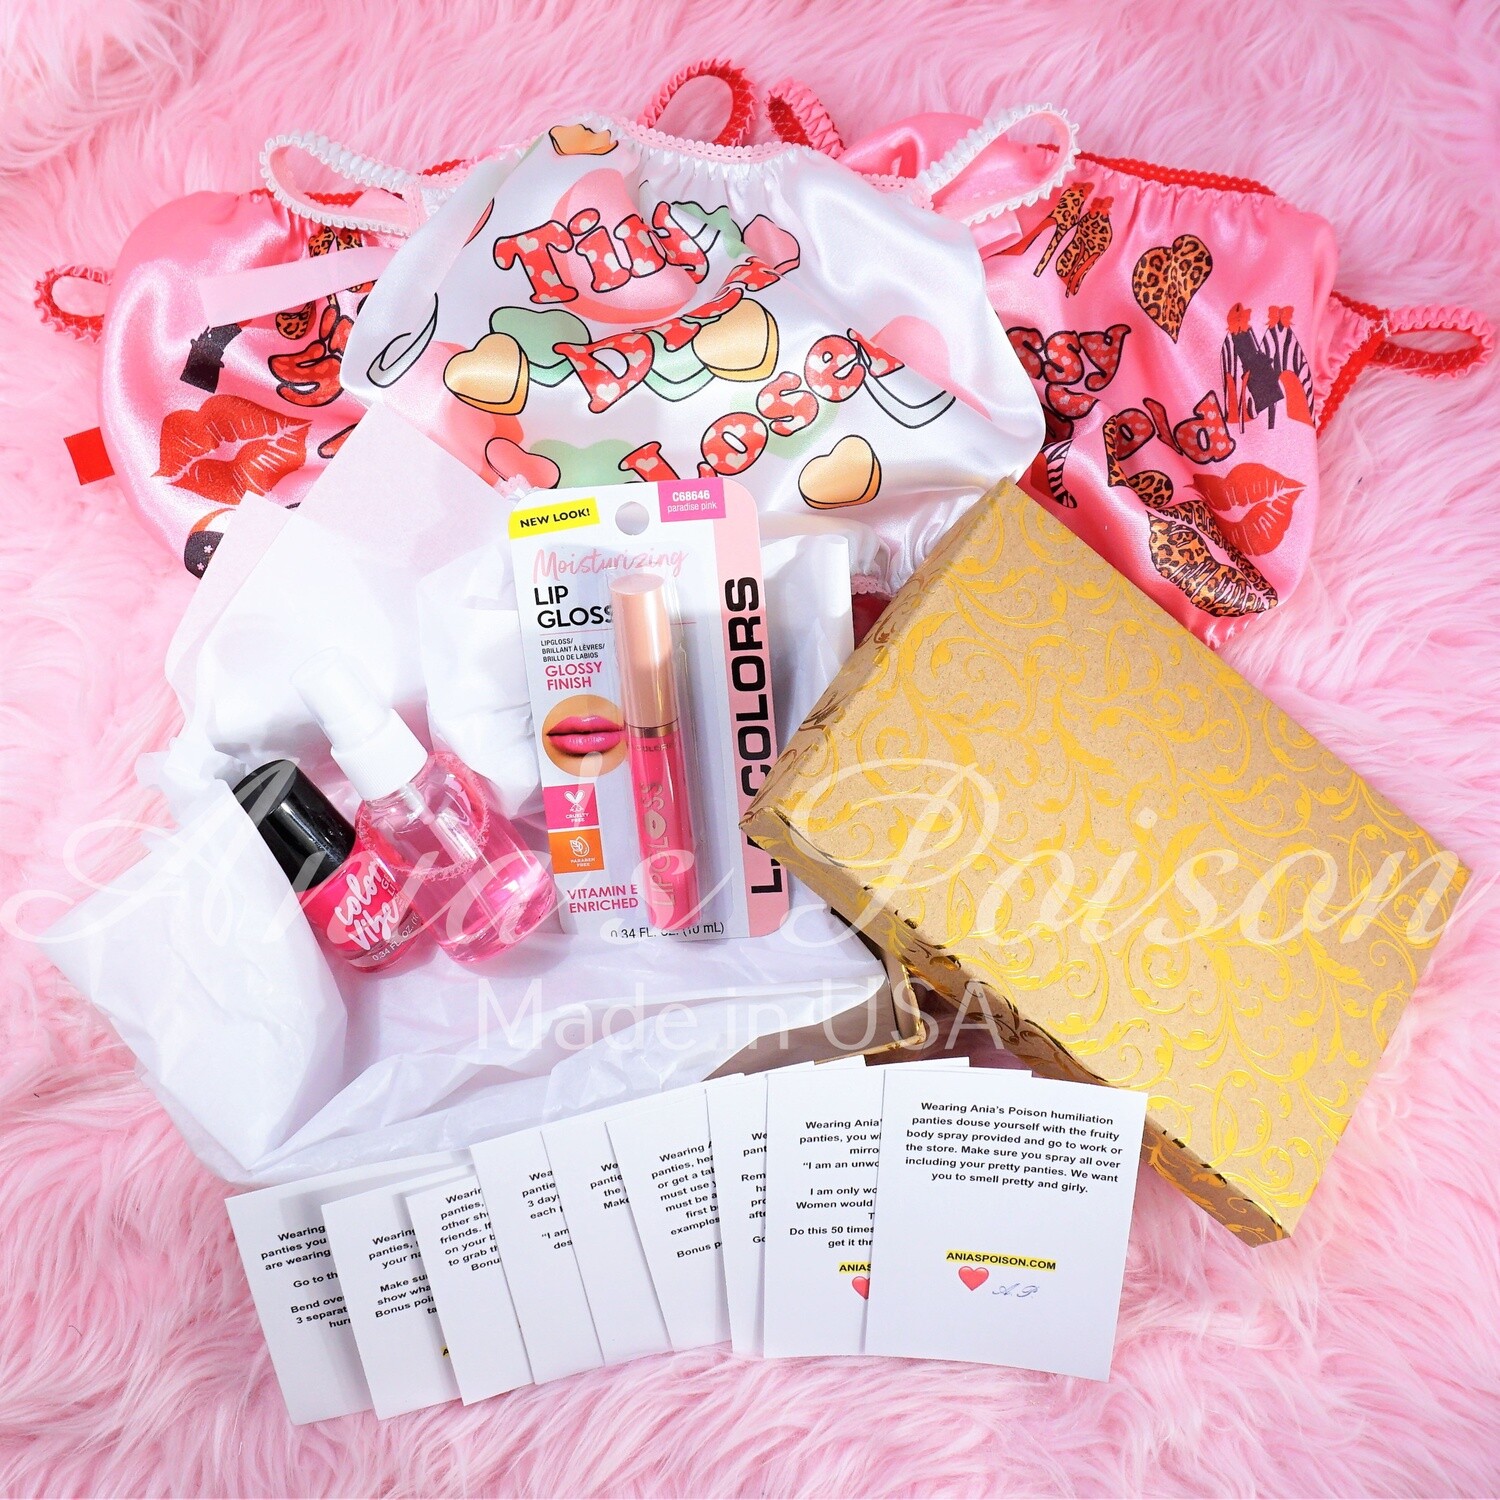 Ania's Poison Sissy Valentines Lovers 3 Day Game Set! Fun humiliation Gift Set for your favorite Sissy! Limited Edition!